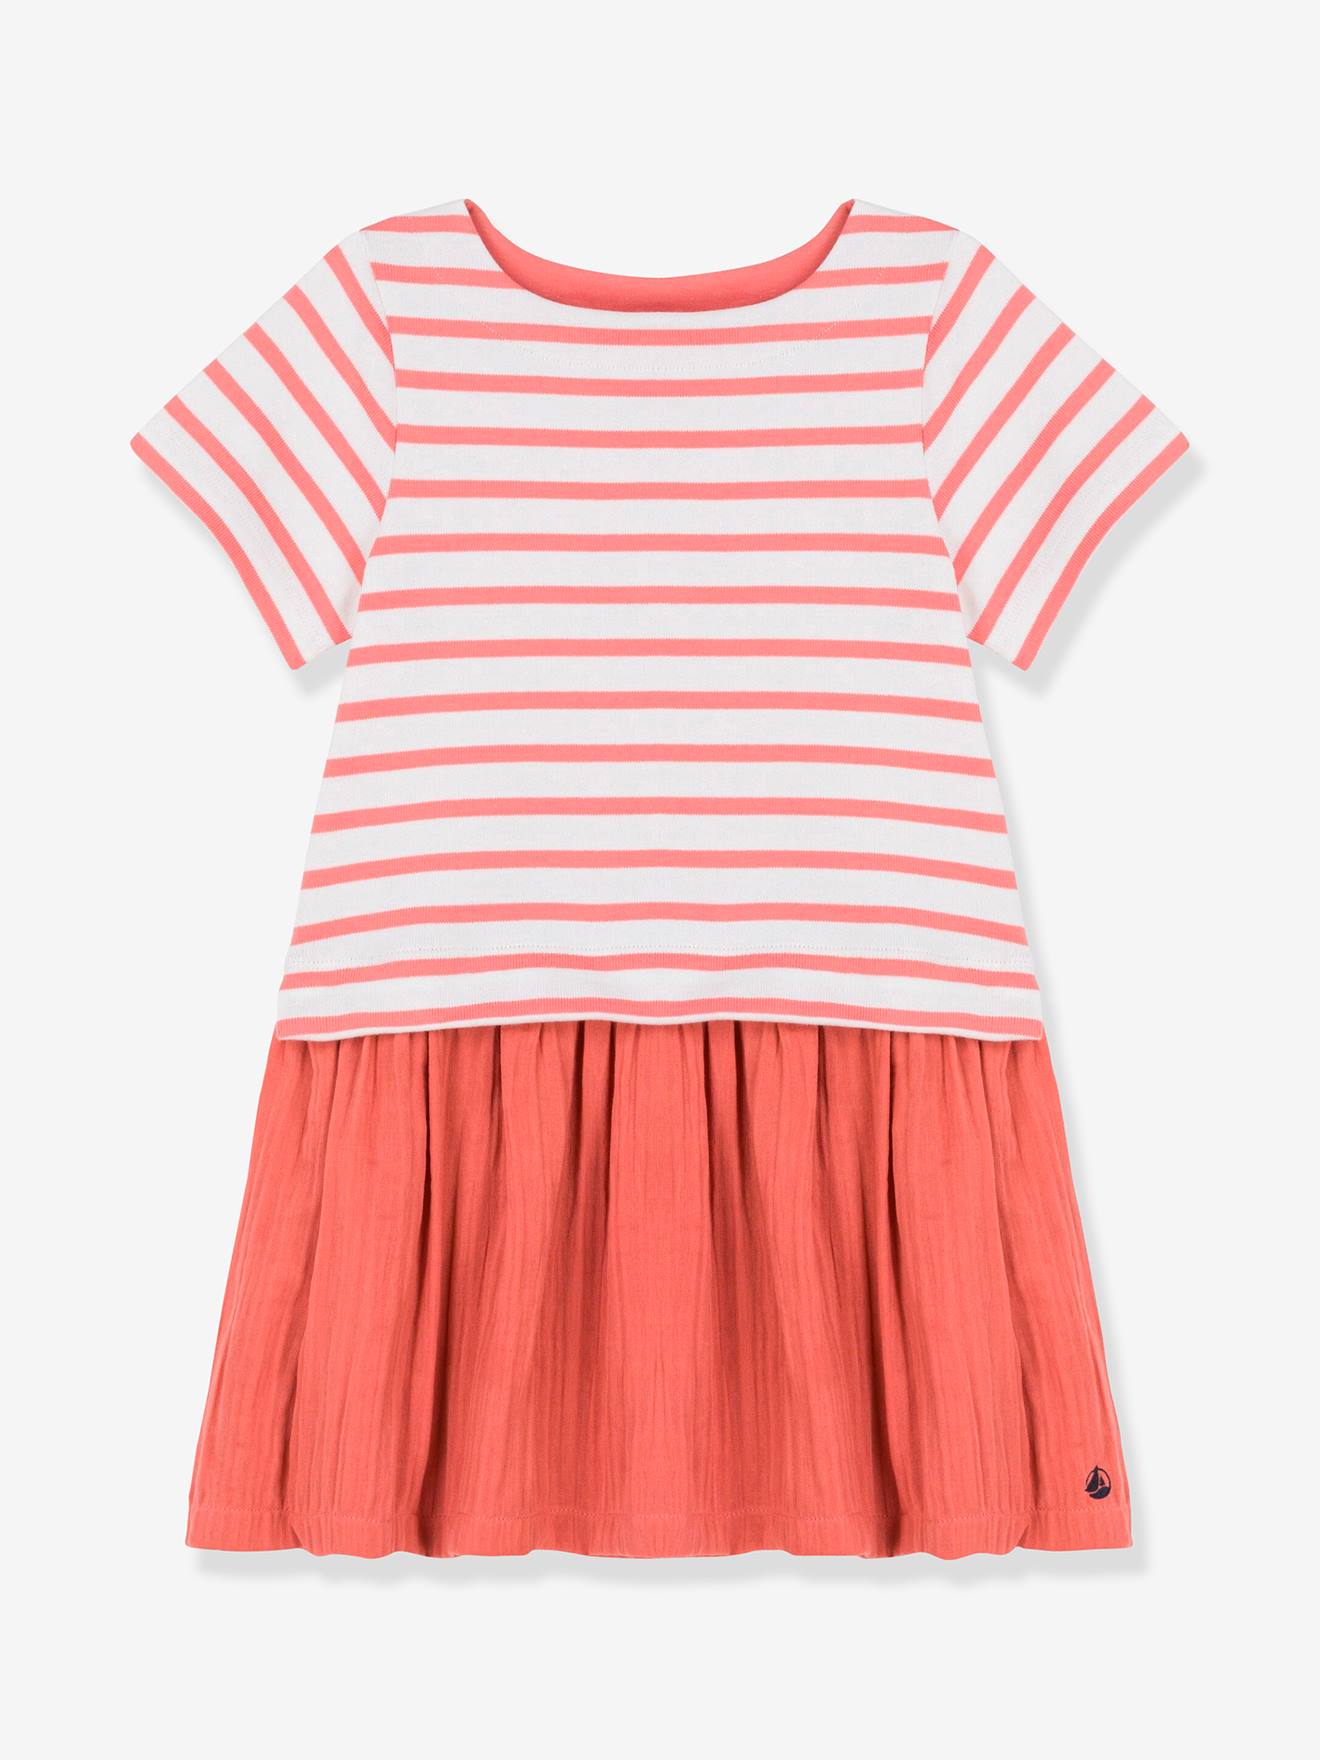 Short Sleeve Dress in Jersey Knit and Organic Cotton Gauze, by PETIT BATEAU red light striped